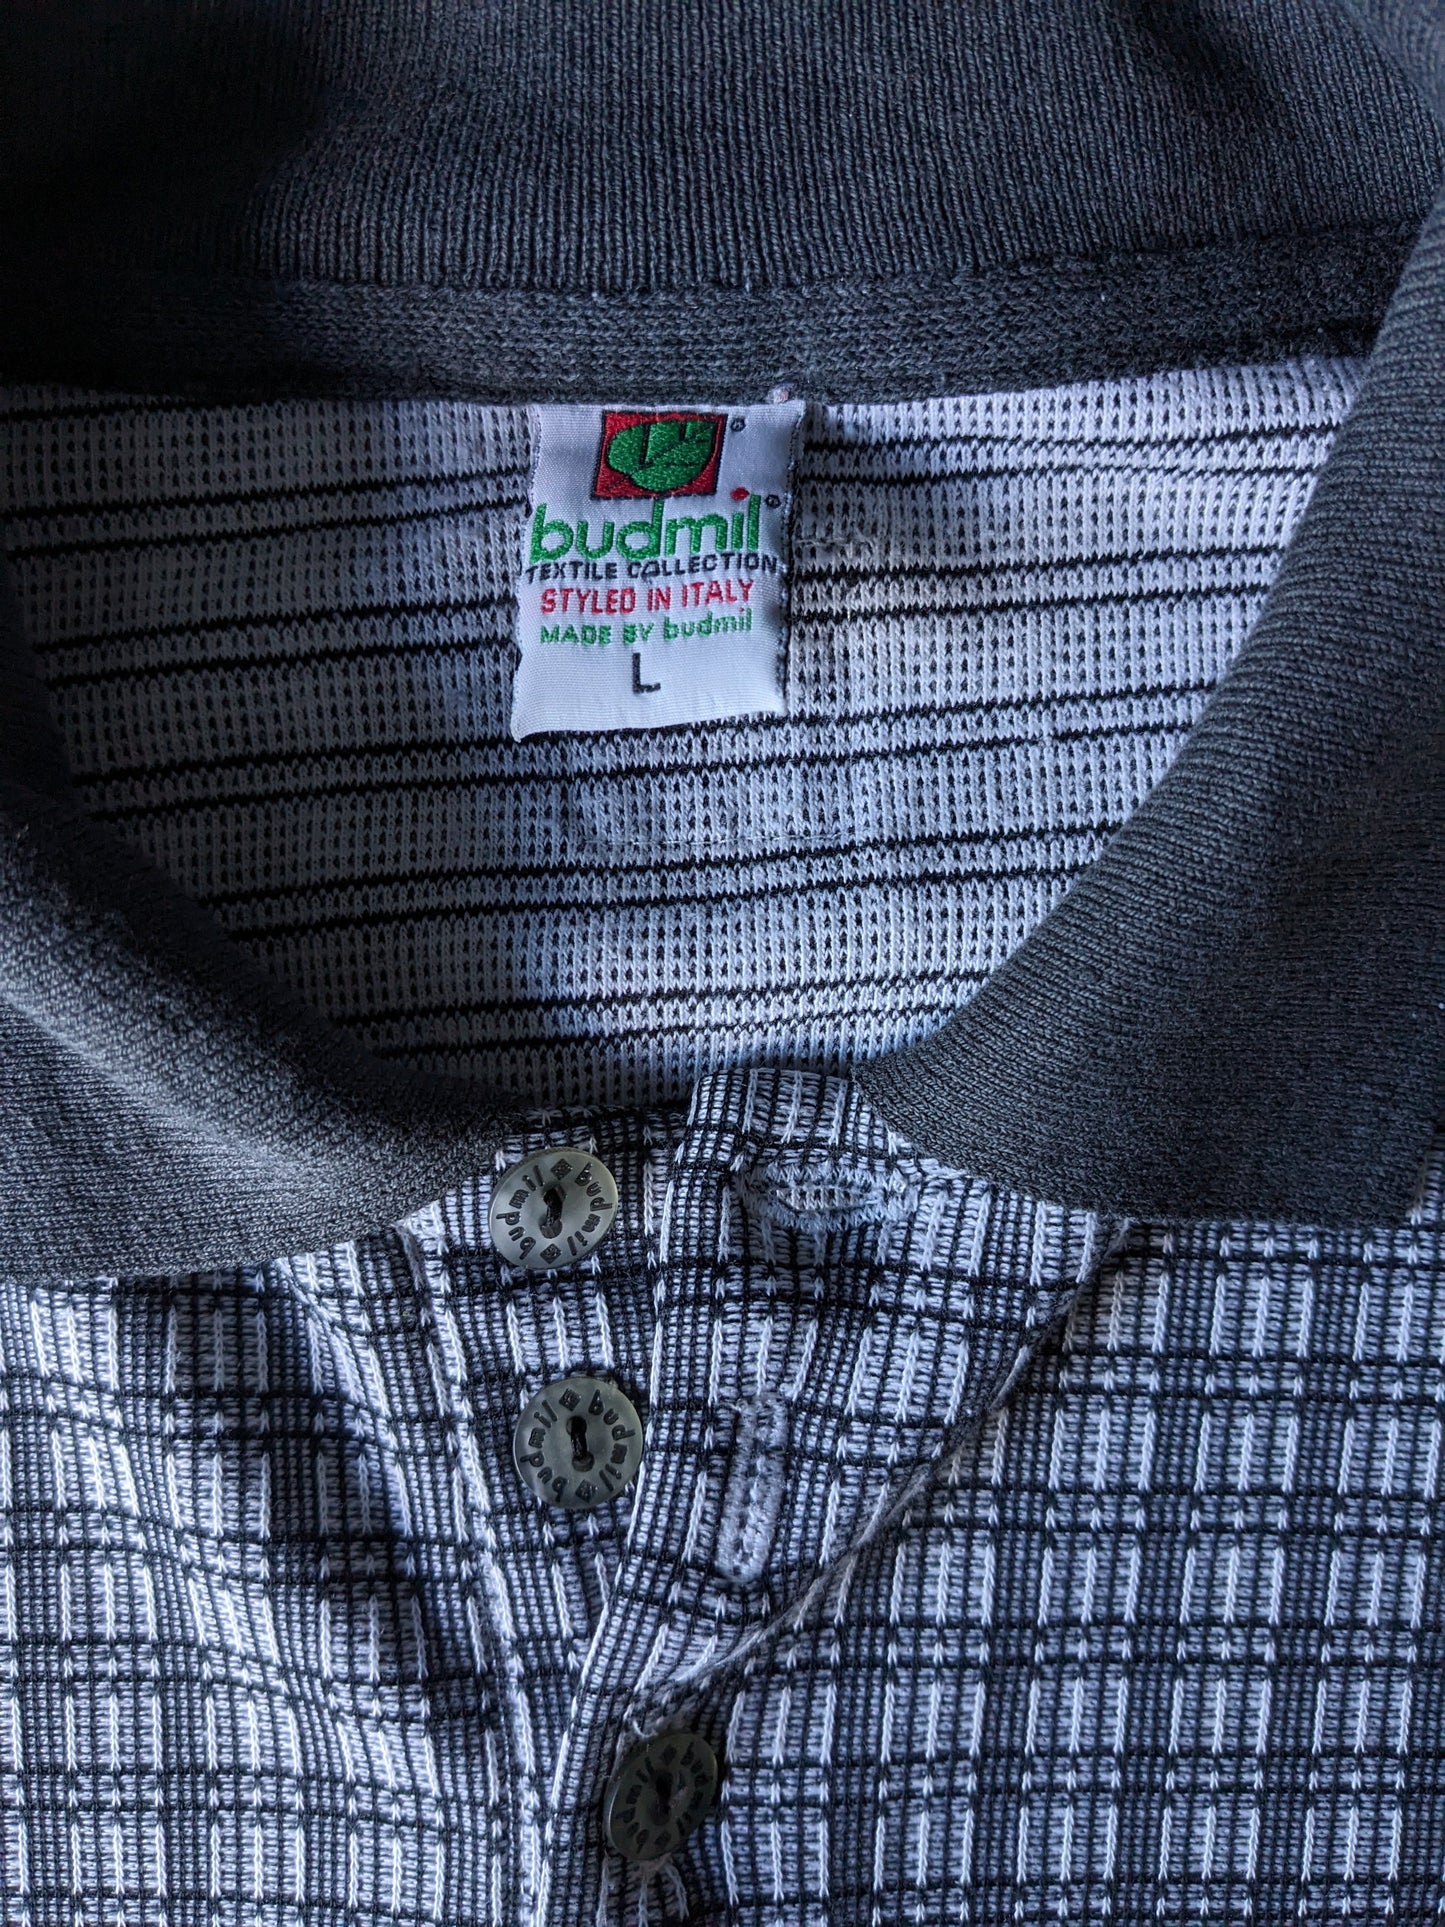 Vintage Budmil Polo. Black and white gray checked. Size L.